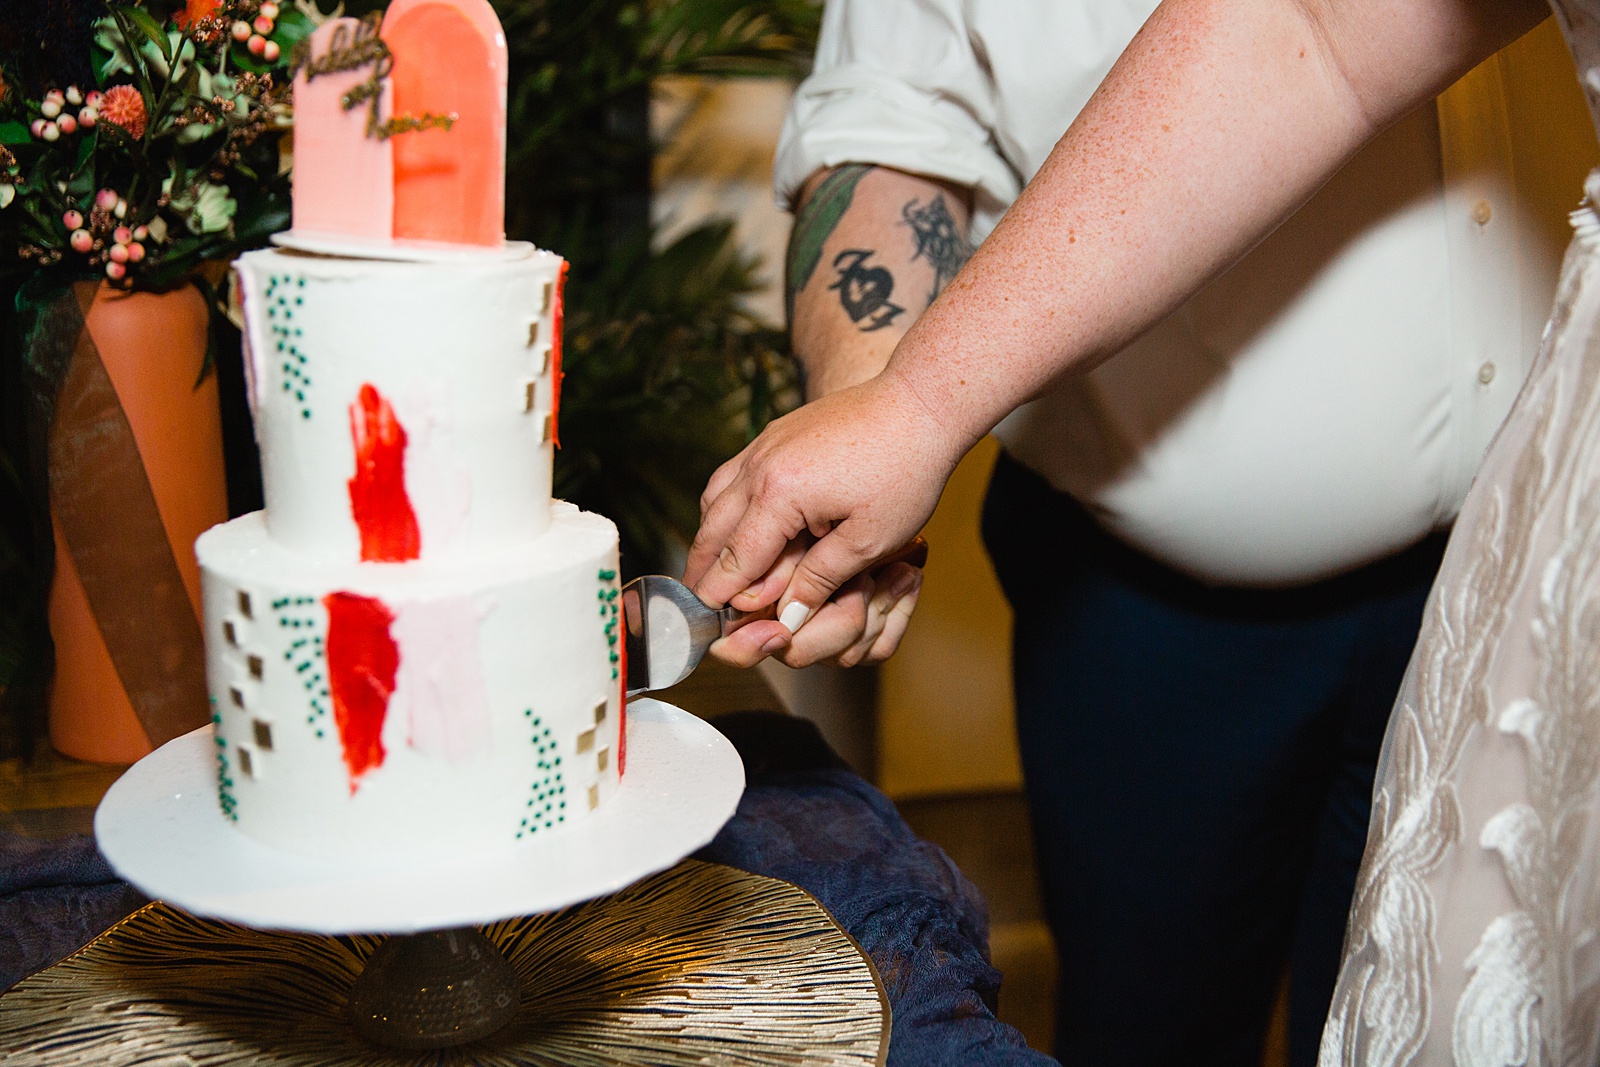 Bride and Groom cutting their wedding cake at their MonOrchid wedding reception by Arizona wedding photographer PMA Photography.